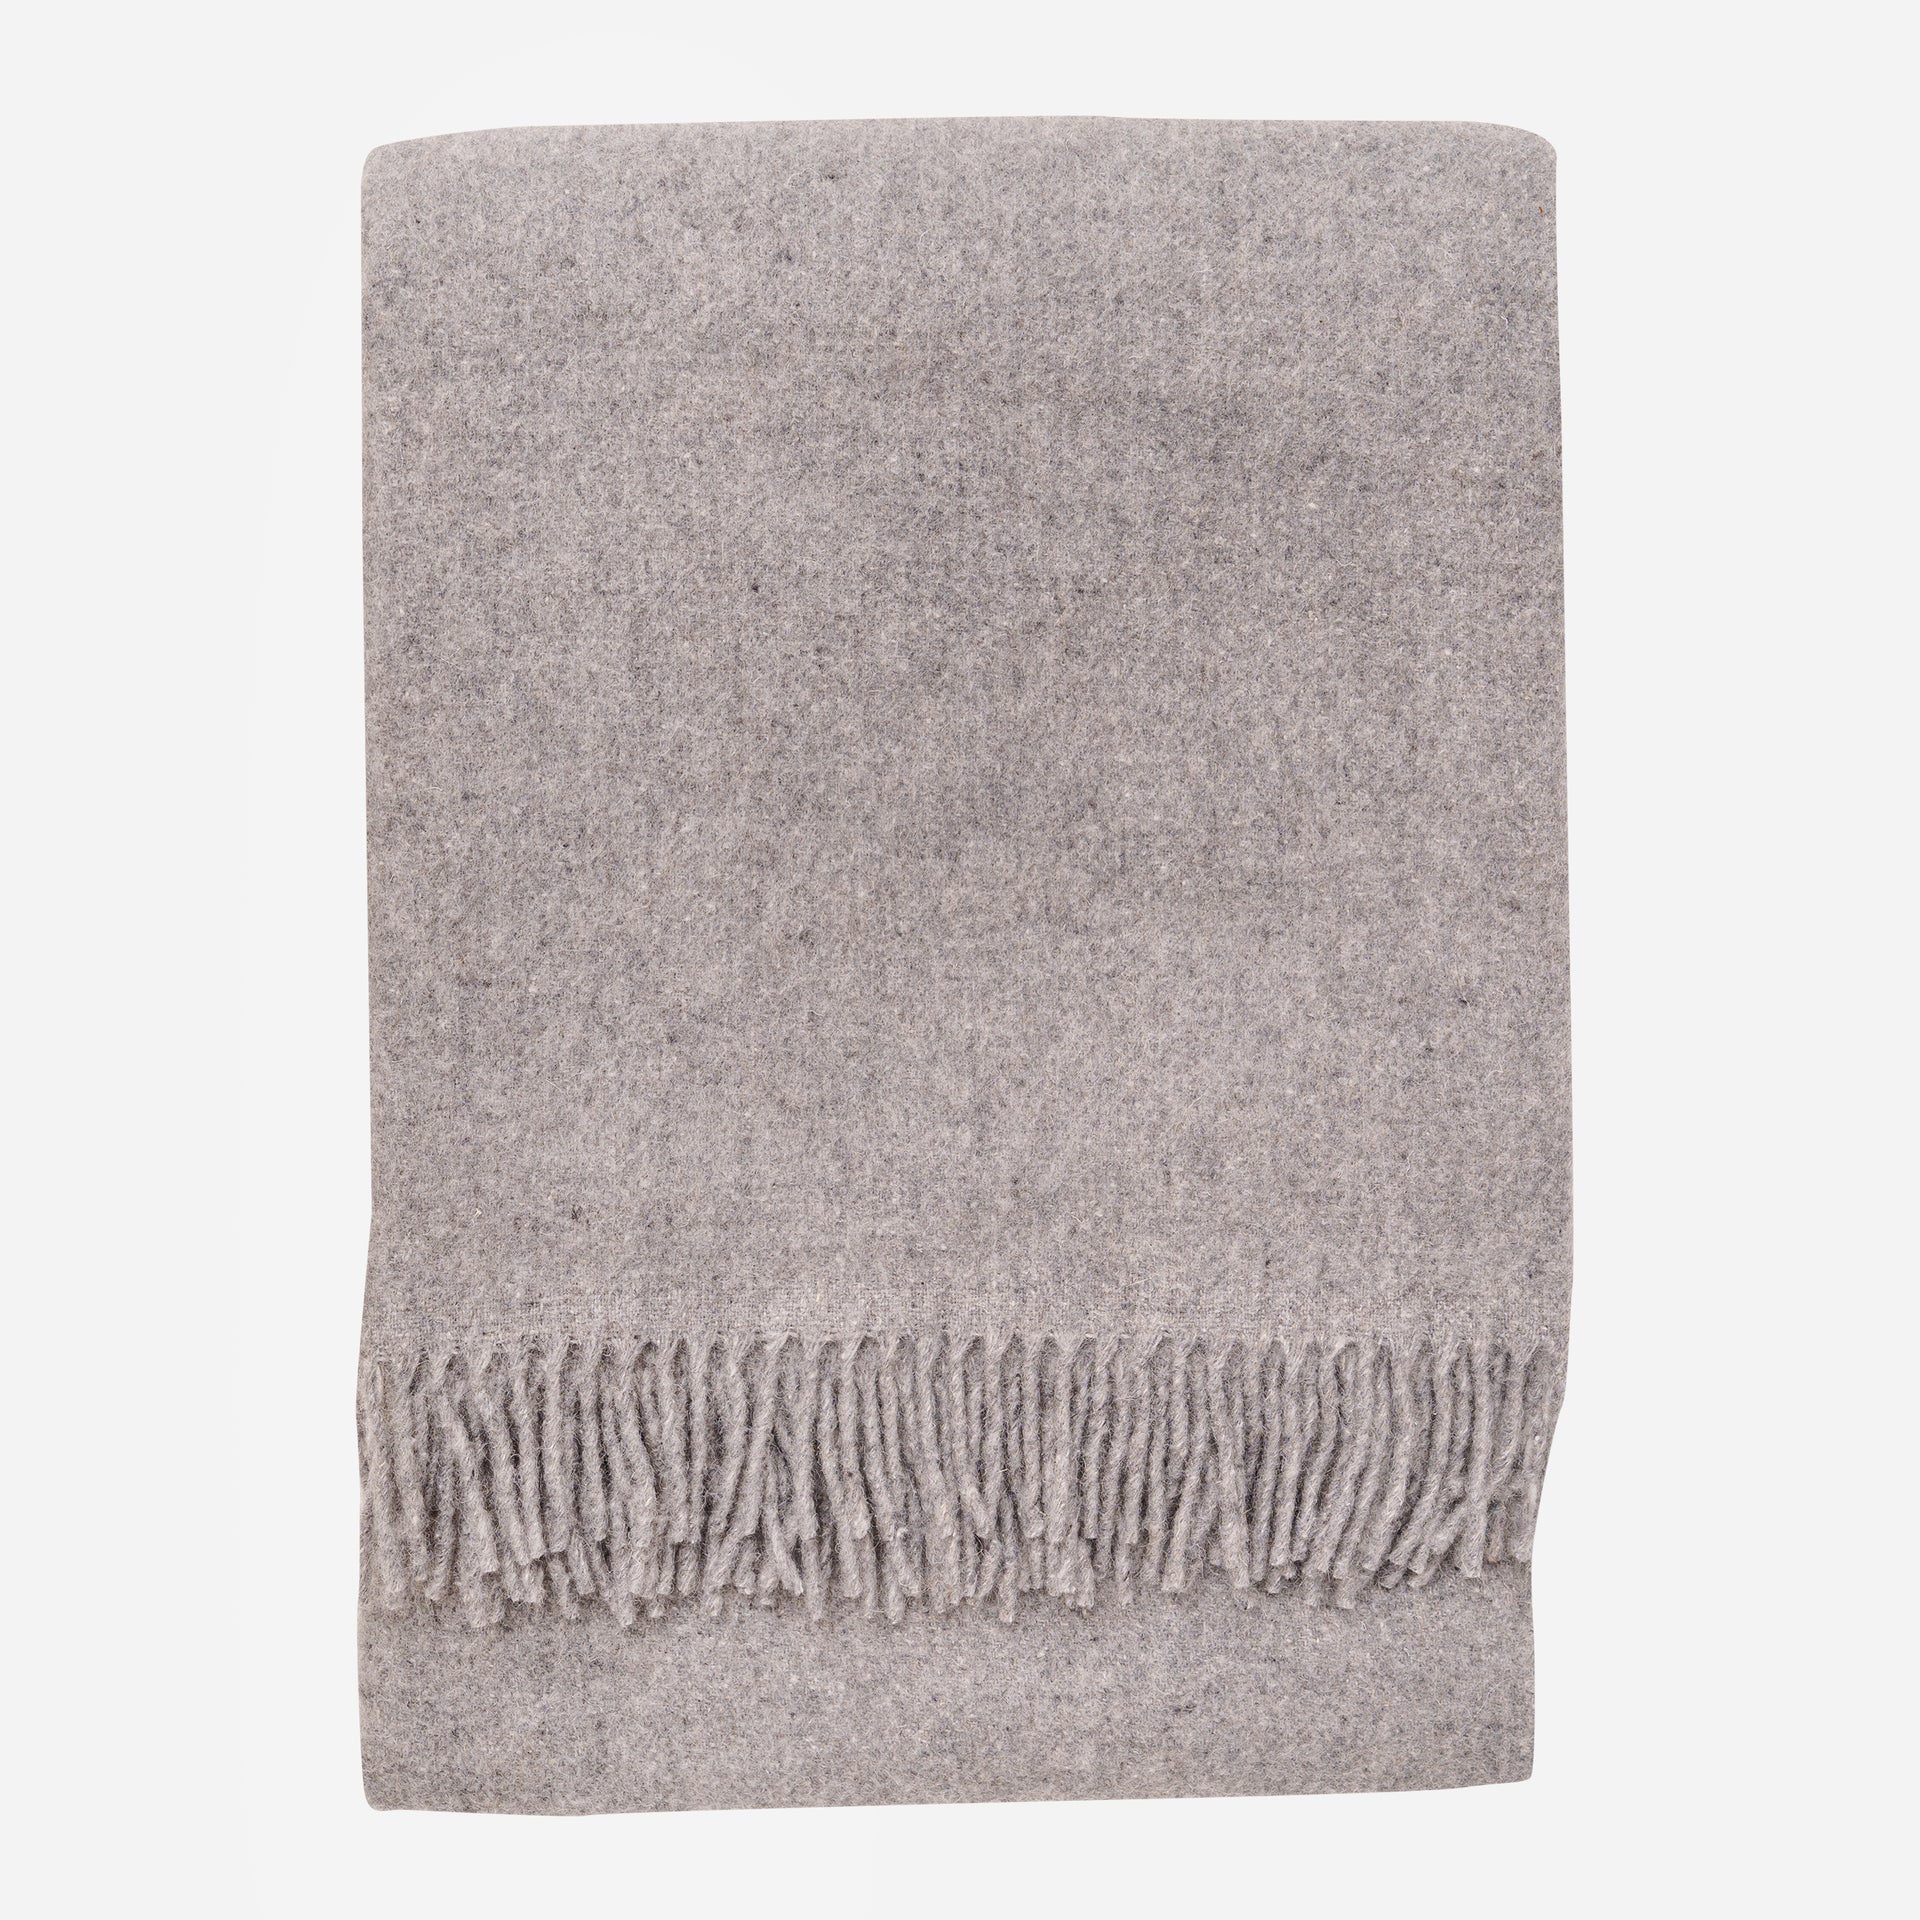 Classic Gray Wool Blanket - Pure Soft Sheep Wool Blanket with Fringes